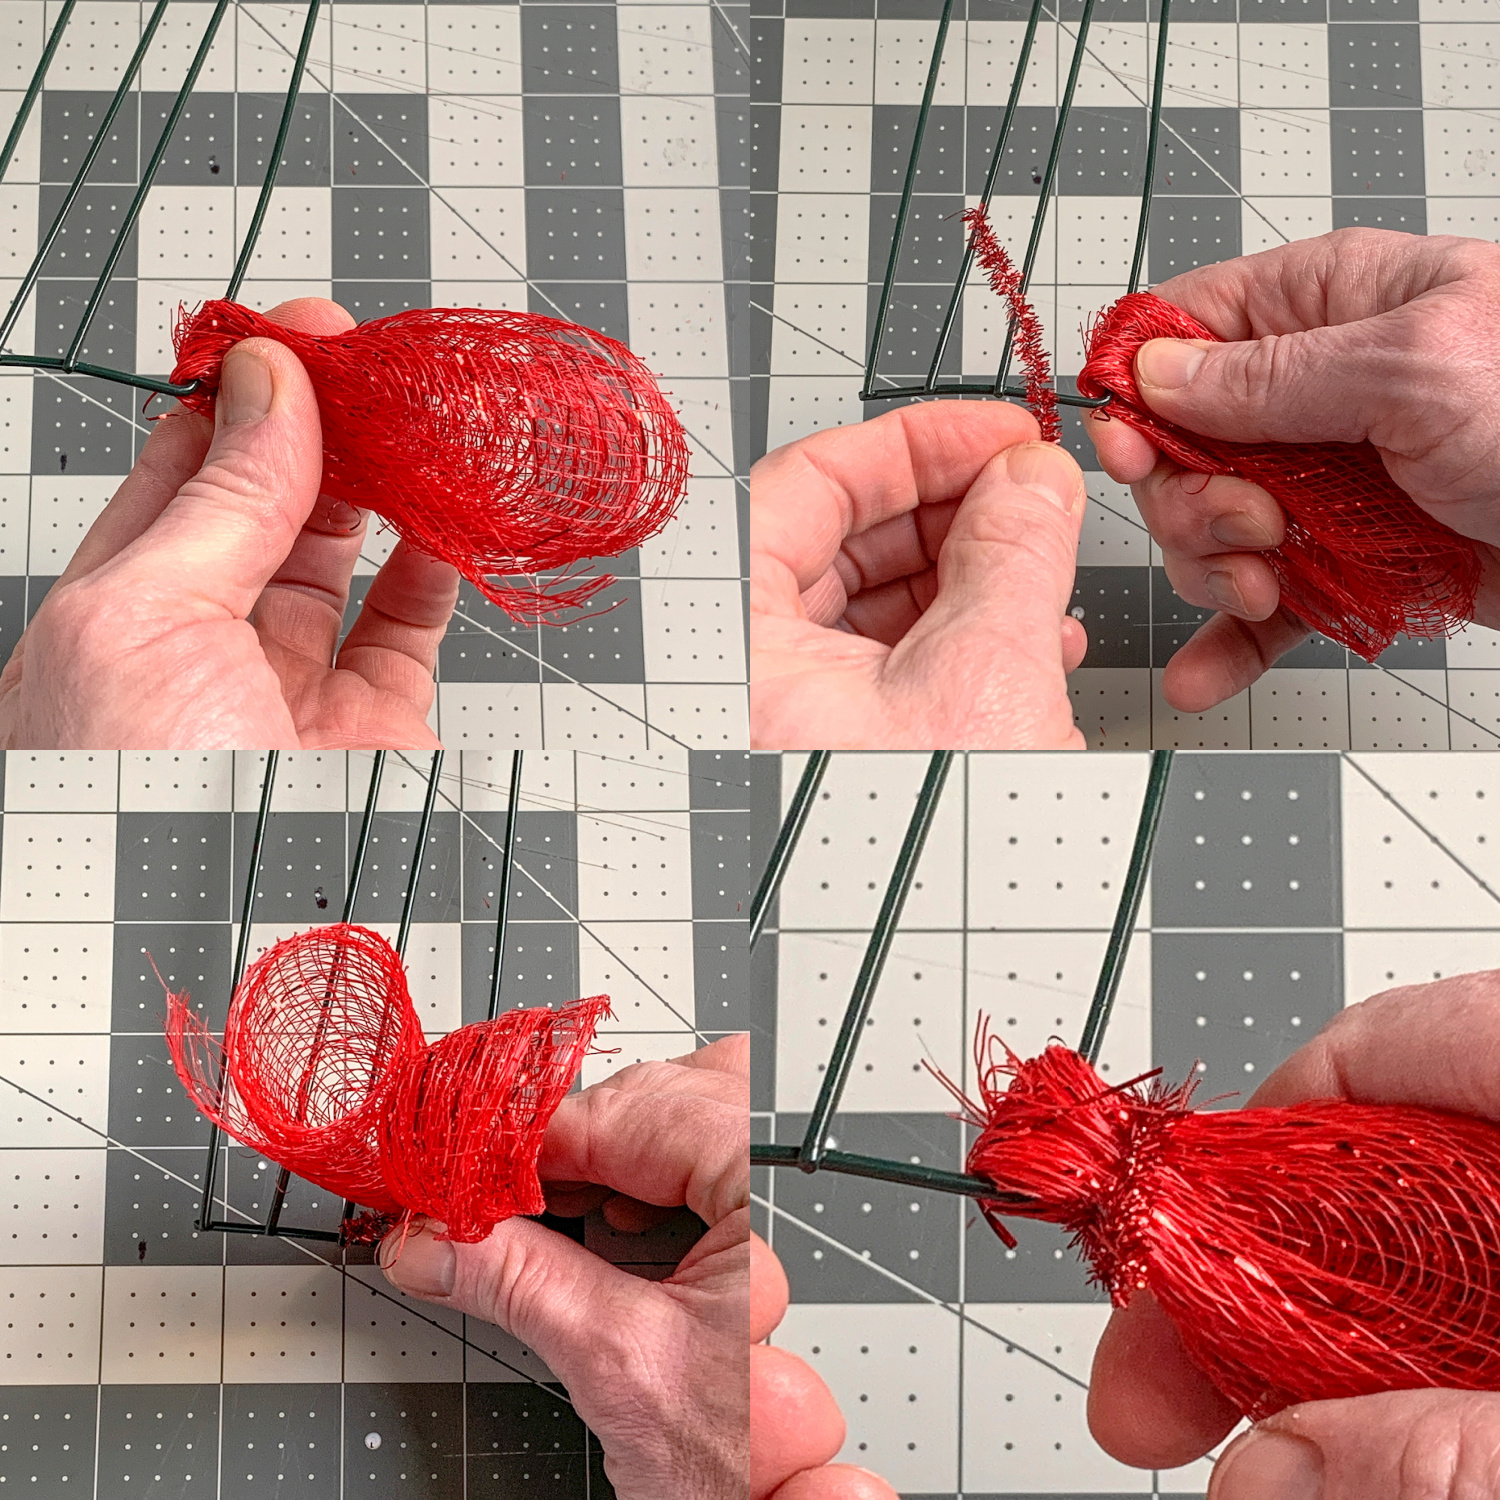 Attaching a piece of red deco mesh around the end of the wreath form